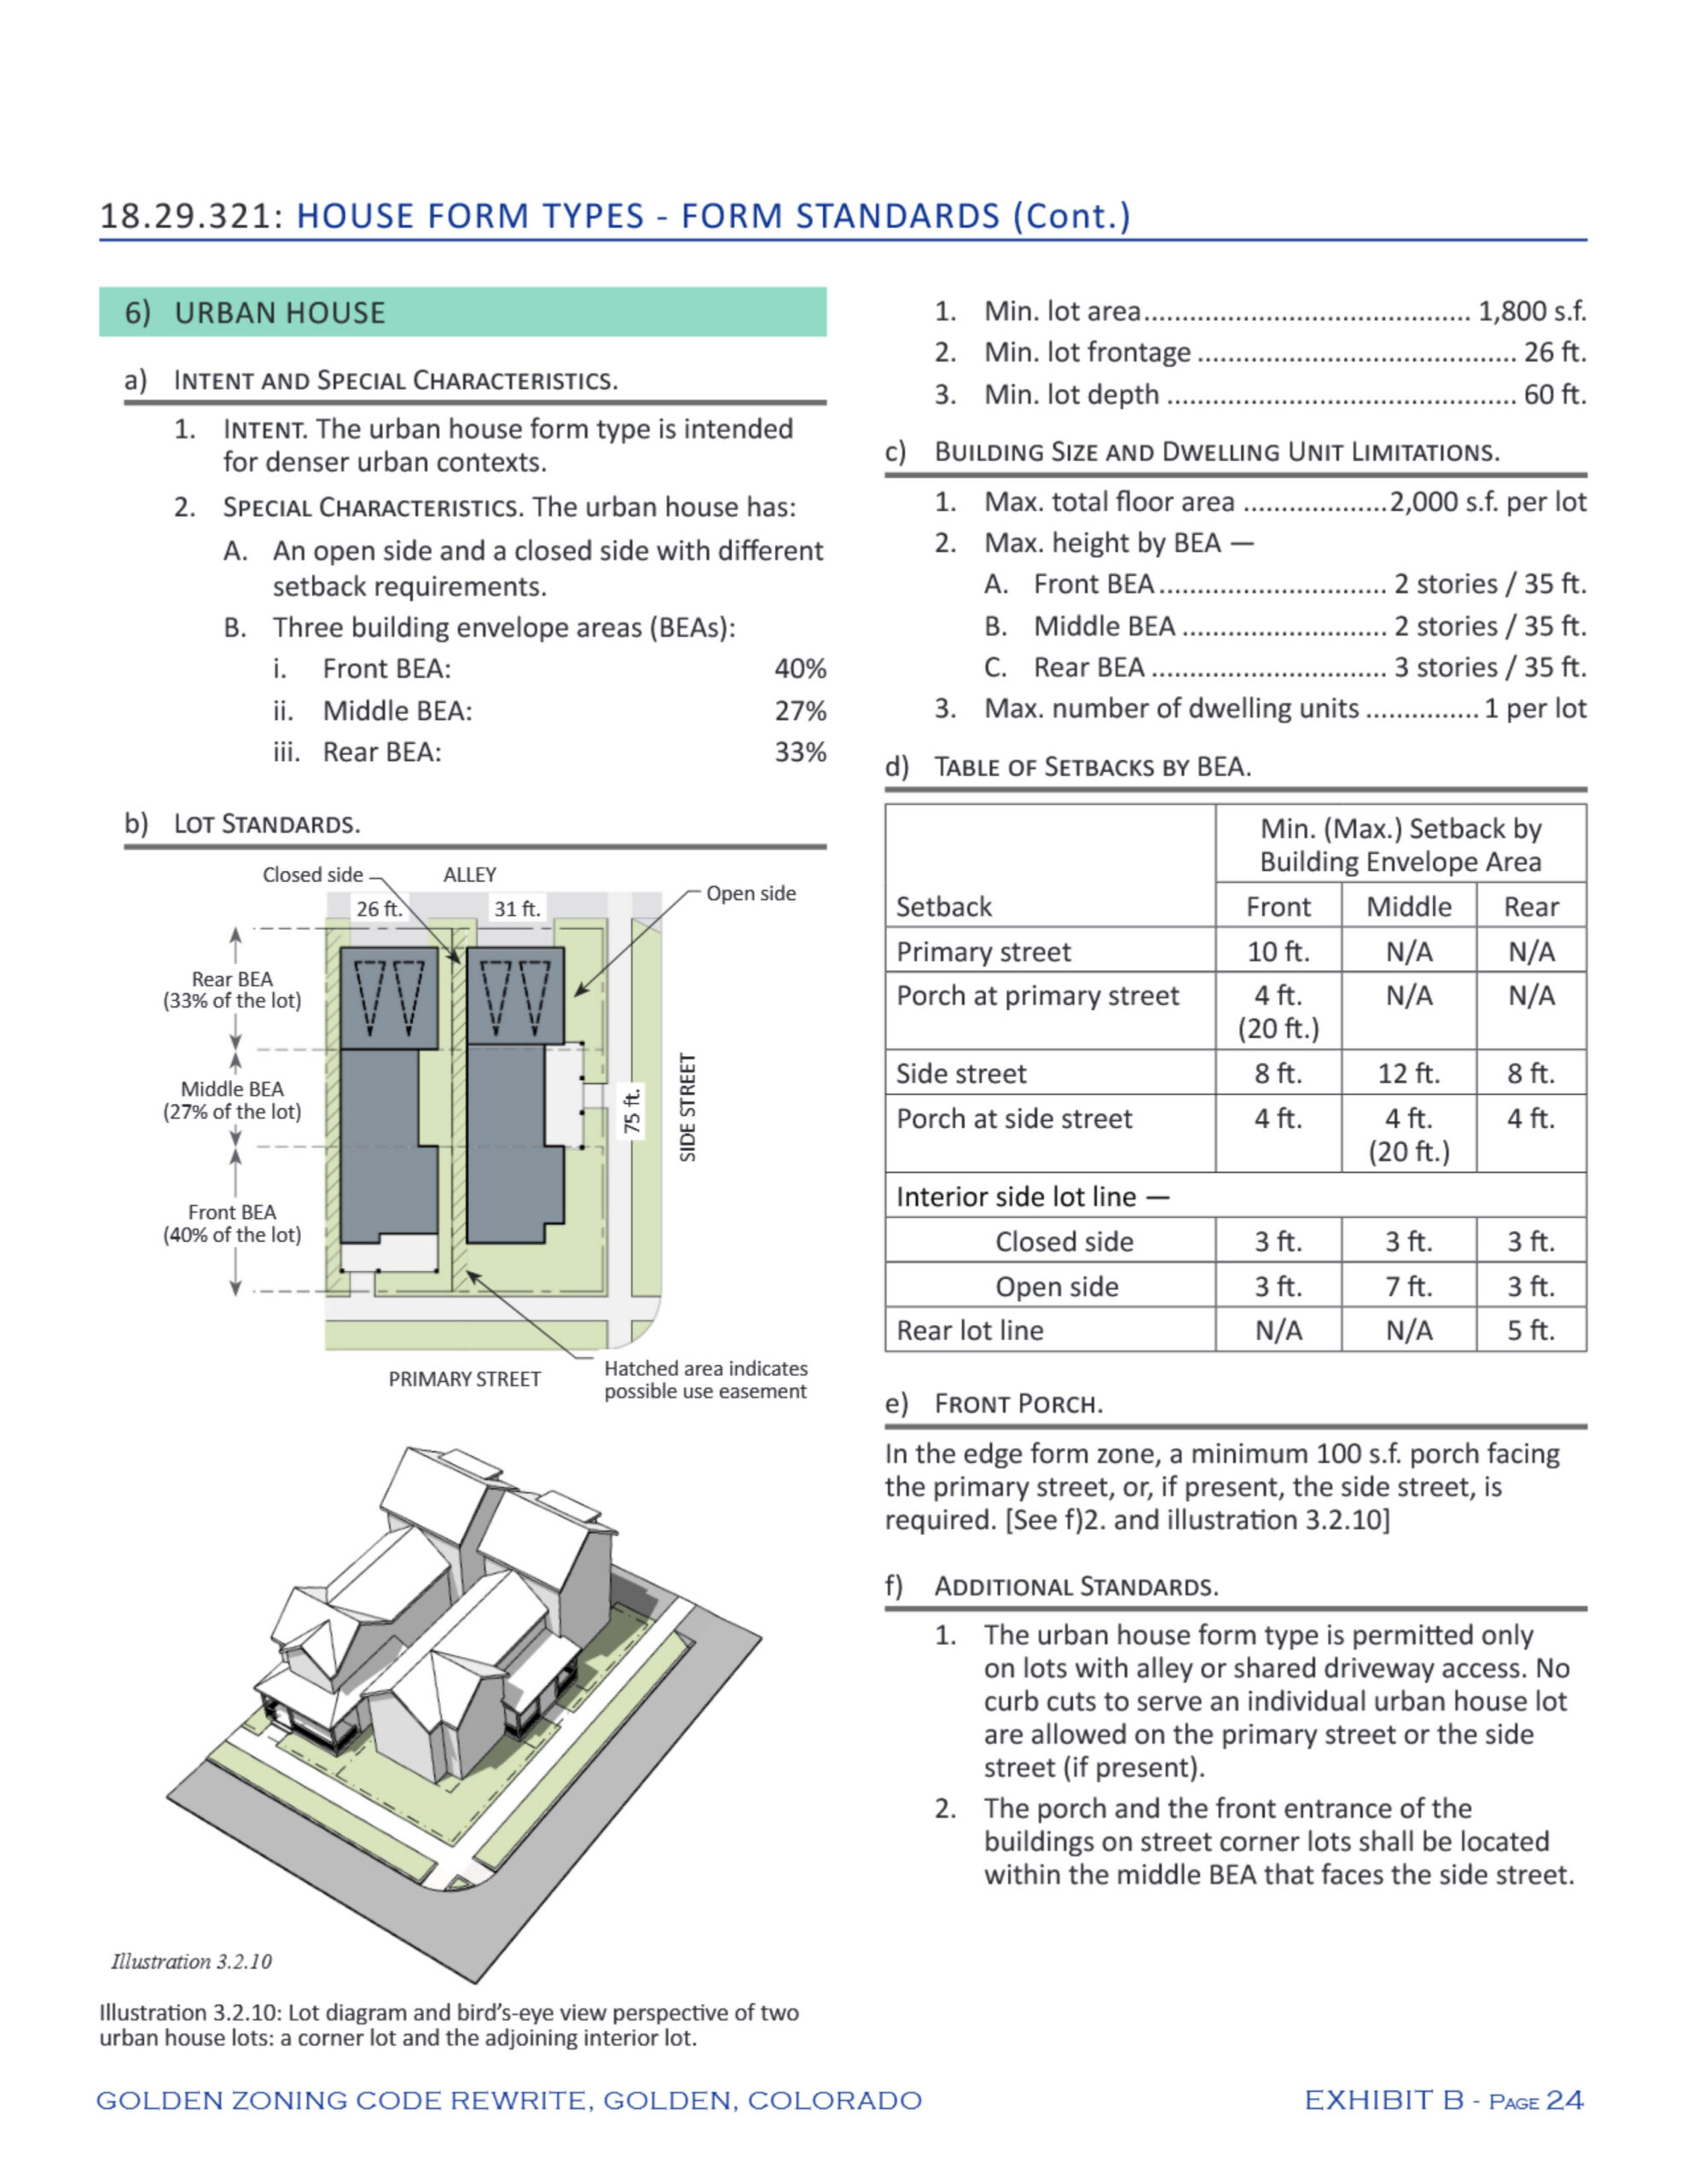 Golden Zoning Code Form Standards example - the Urban House